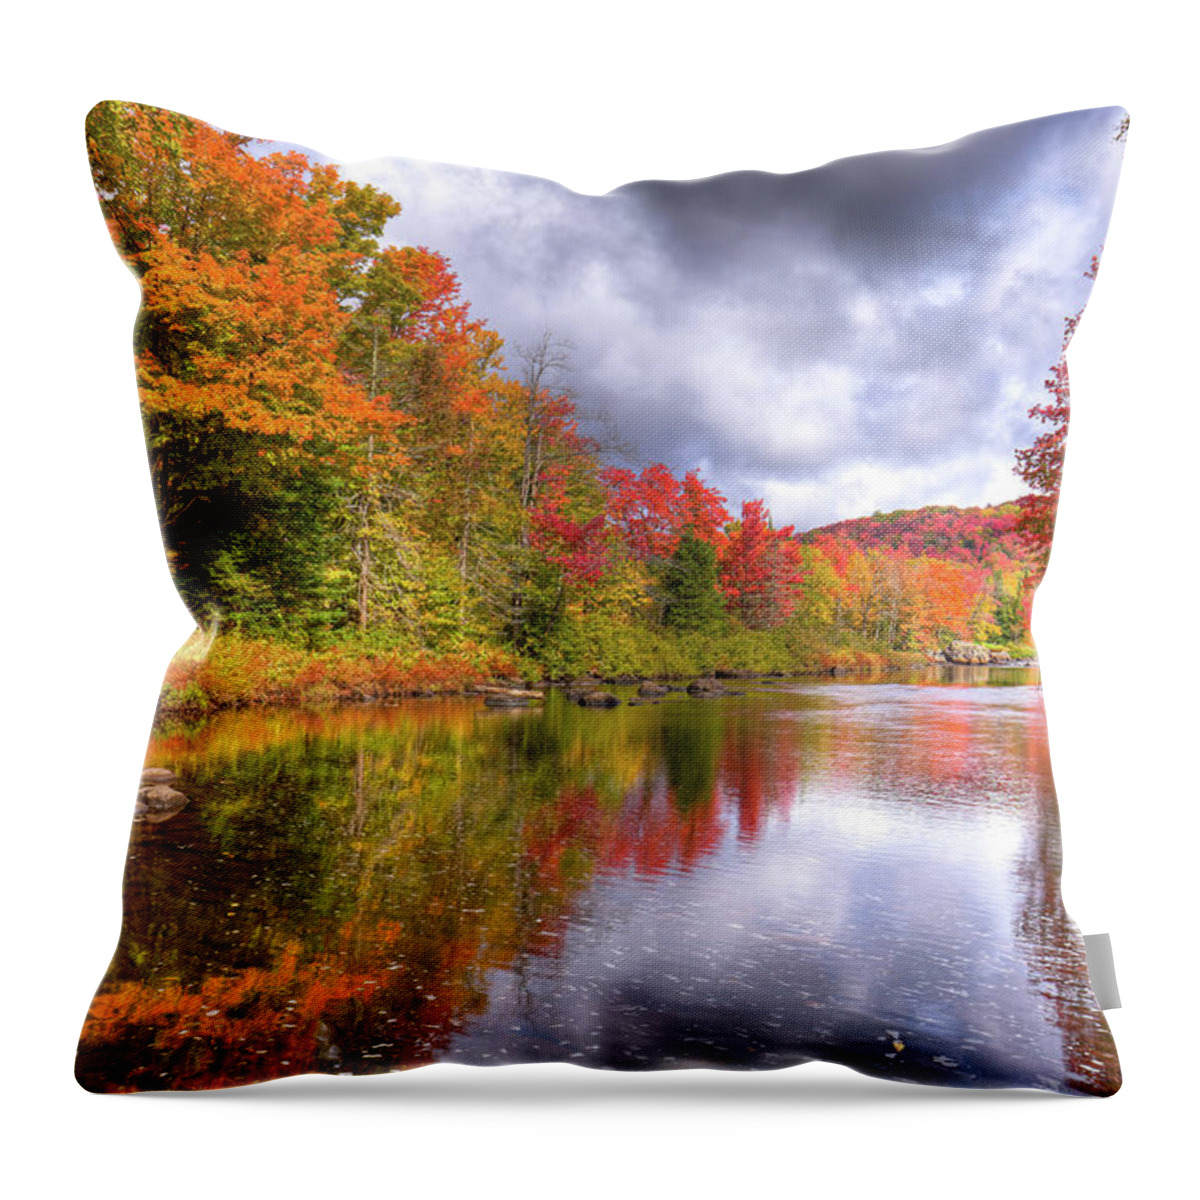 Landscapes Throw Pillow featuring the photograph A Cloudy Autumn Day by David Patterson